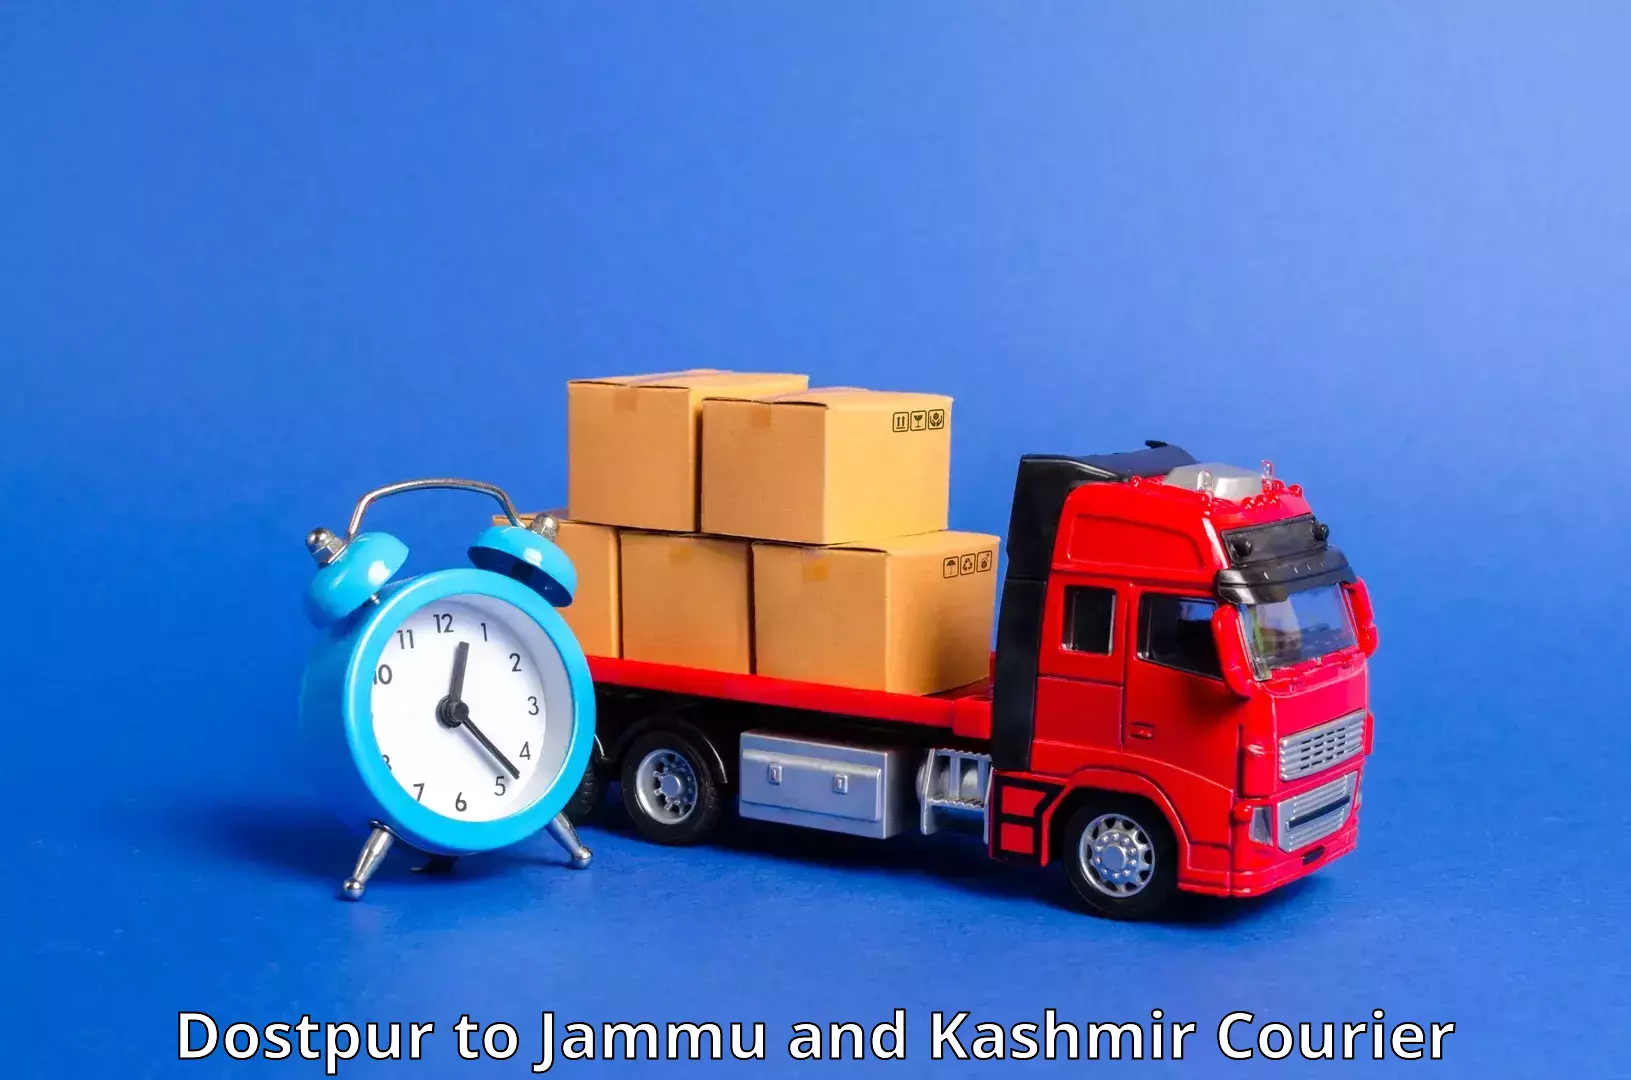 Courier insurance Dostpur to Jammu and Kashmir